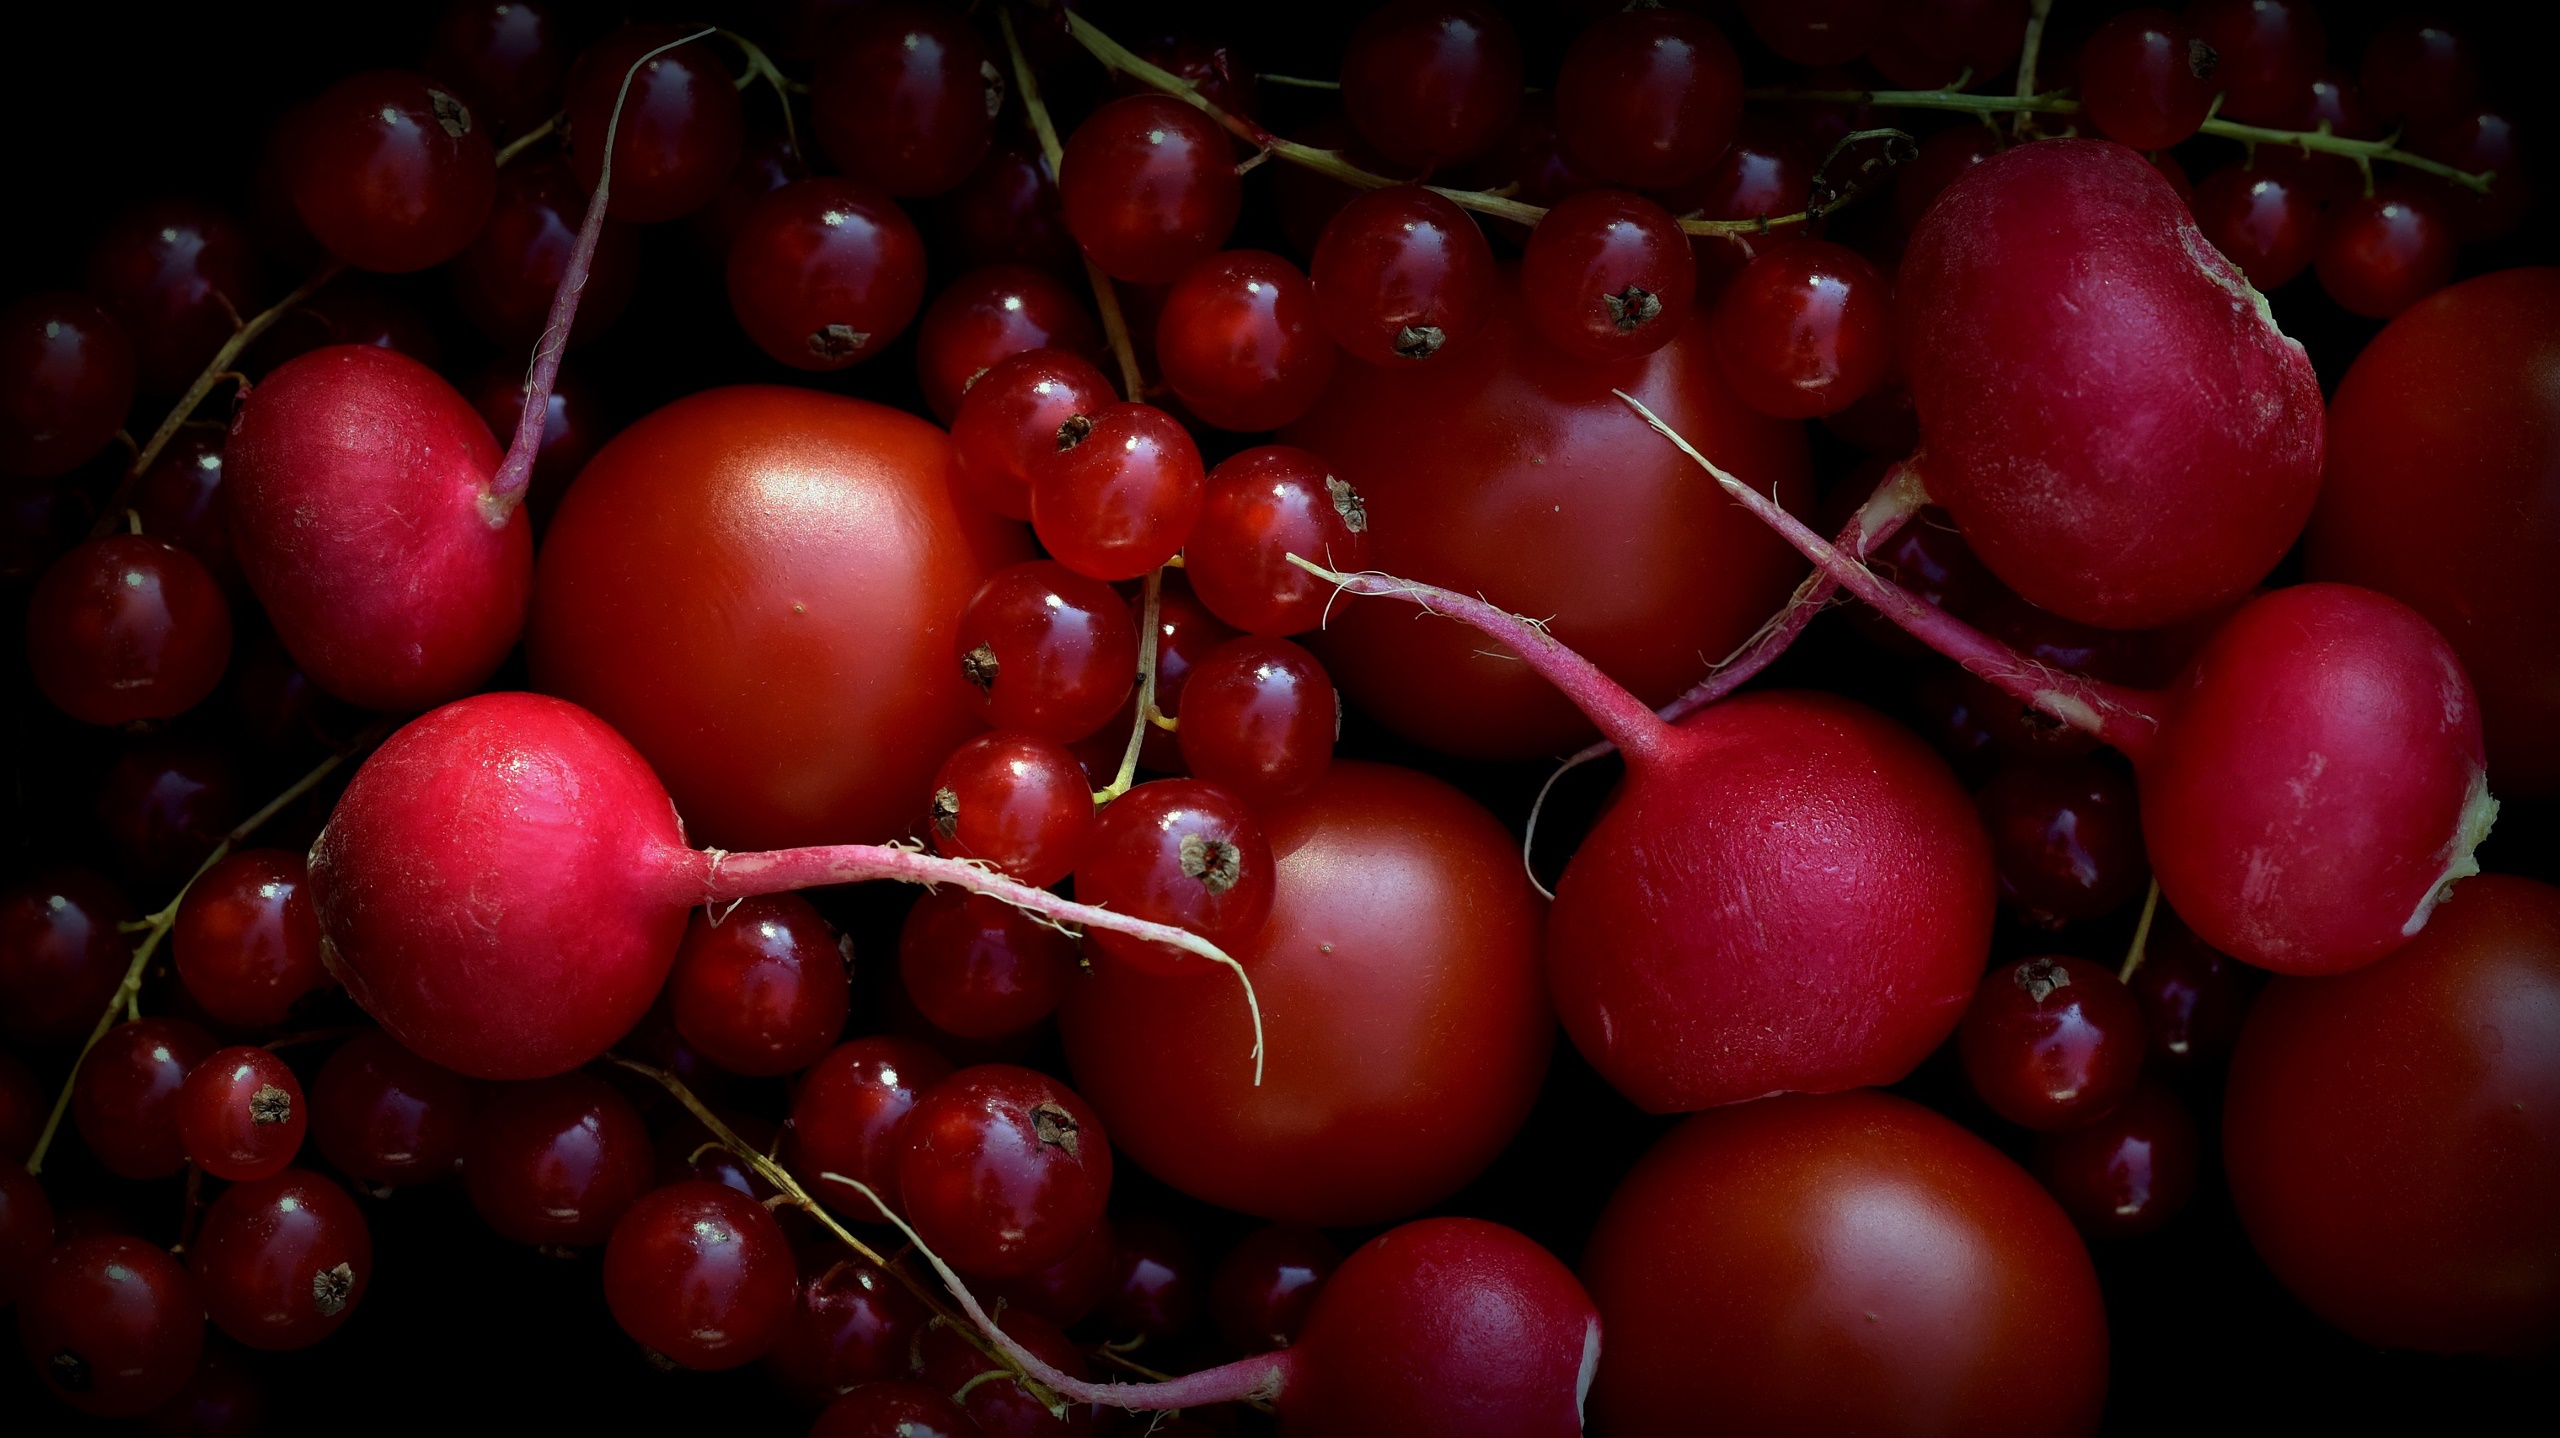 Red Food Fruit Vegetables Radish Tomatoes Red Currant 2560x1438